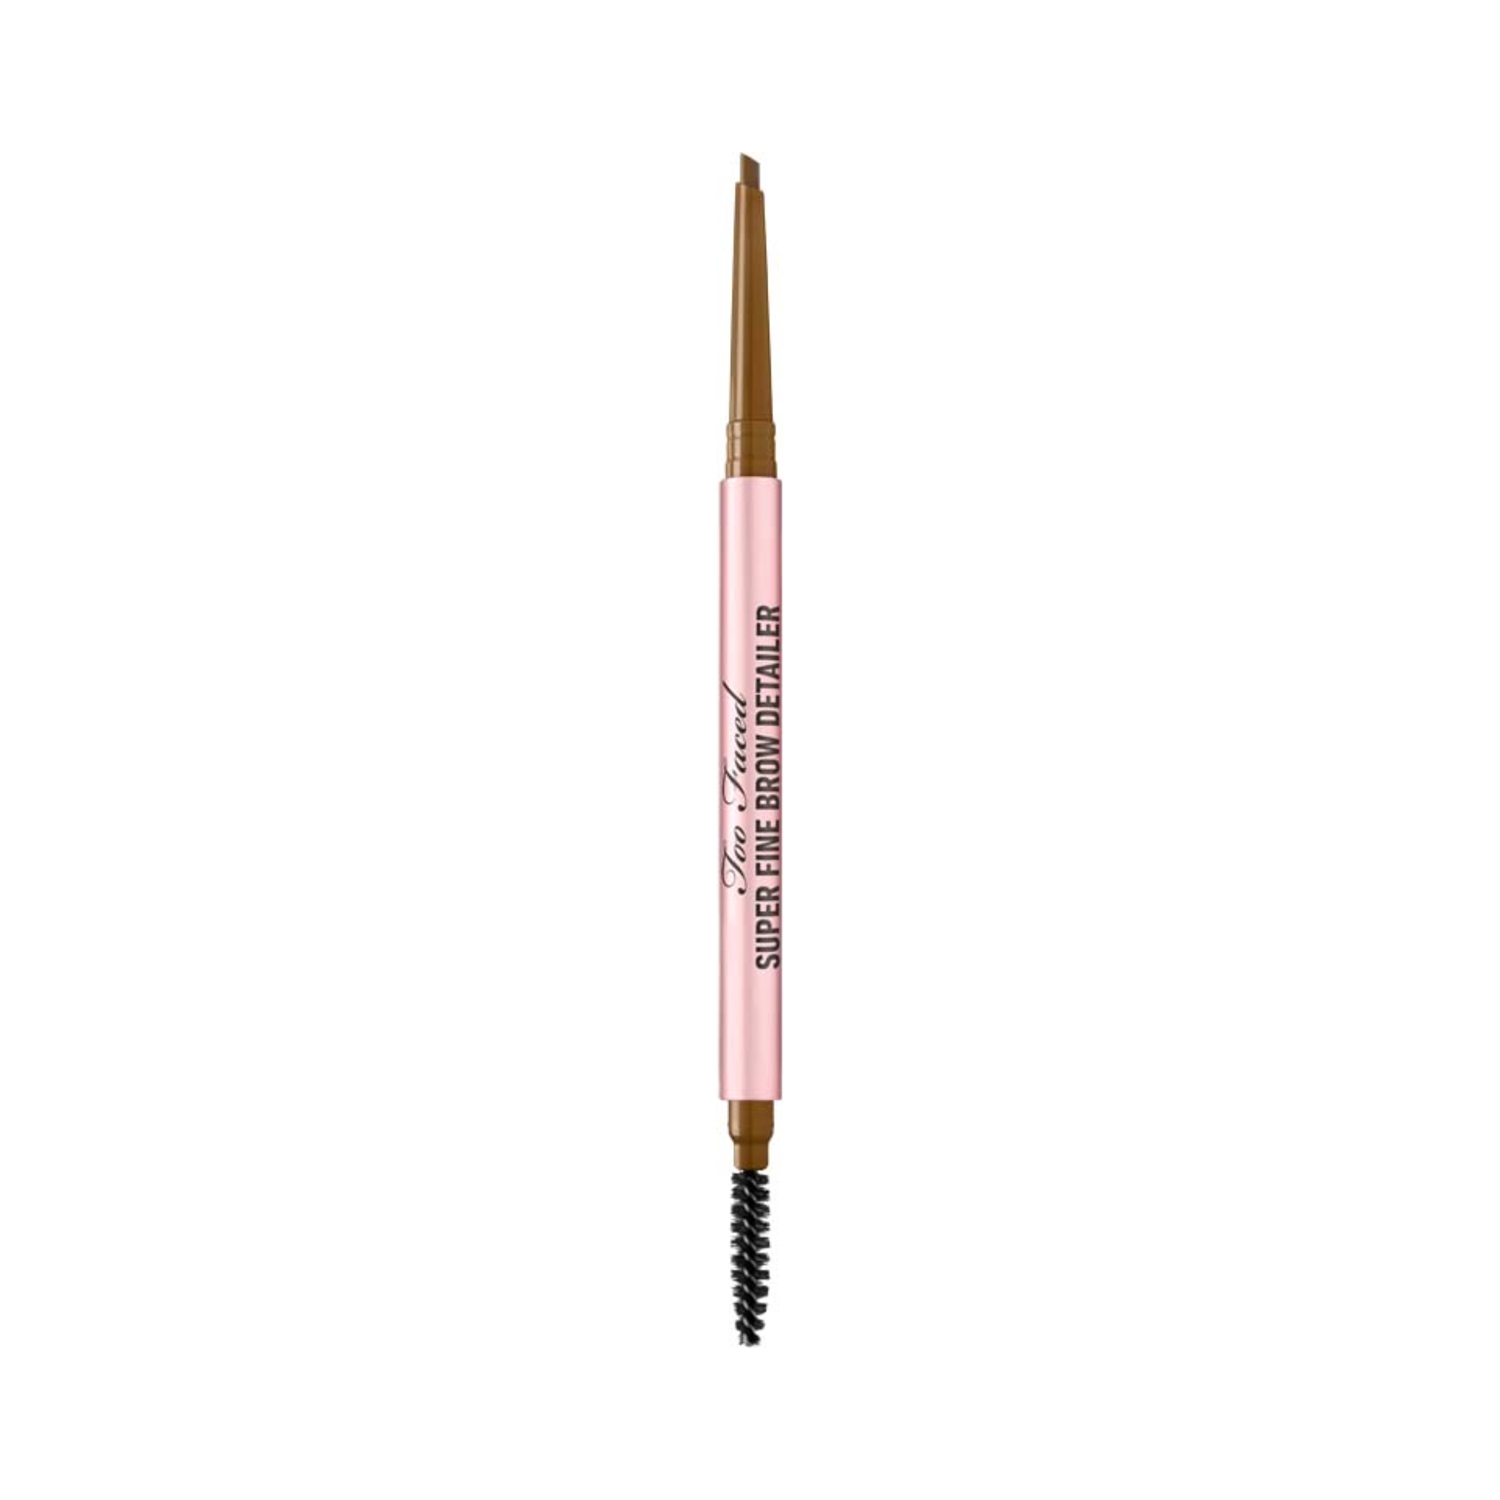 Too Faced | Too Faced Super Fine Brow Detailer - Natural Blonde (0.08g)